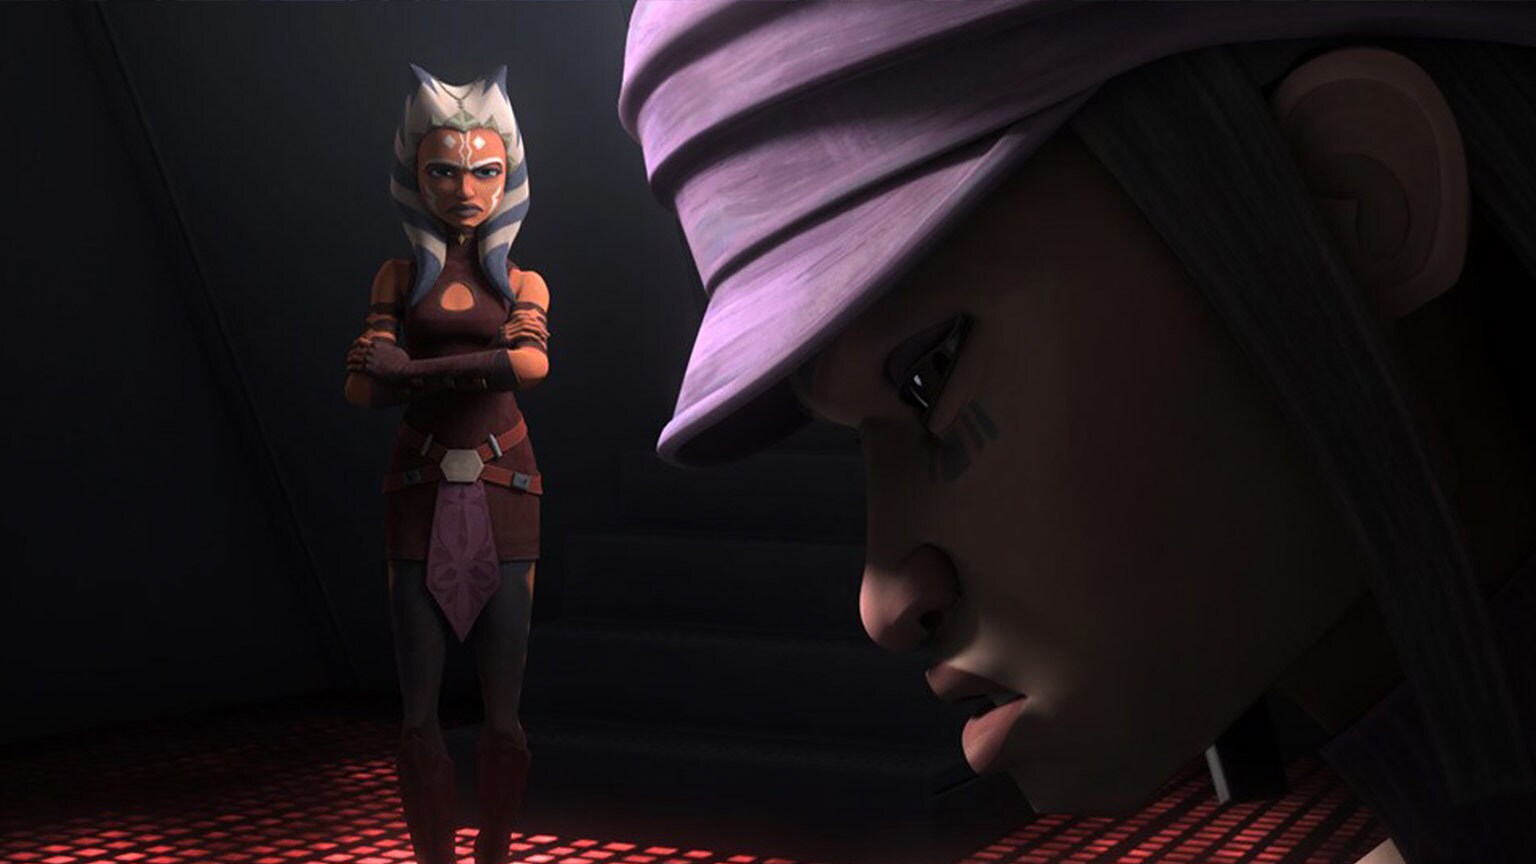 The Clone Wars Rewatch: A Murder Plot and "The Jedi Who Knew Too Much"